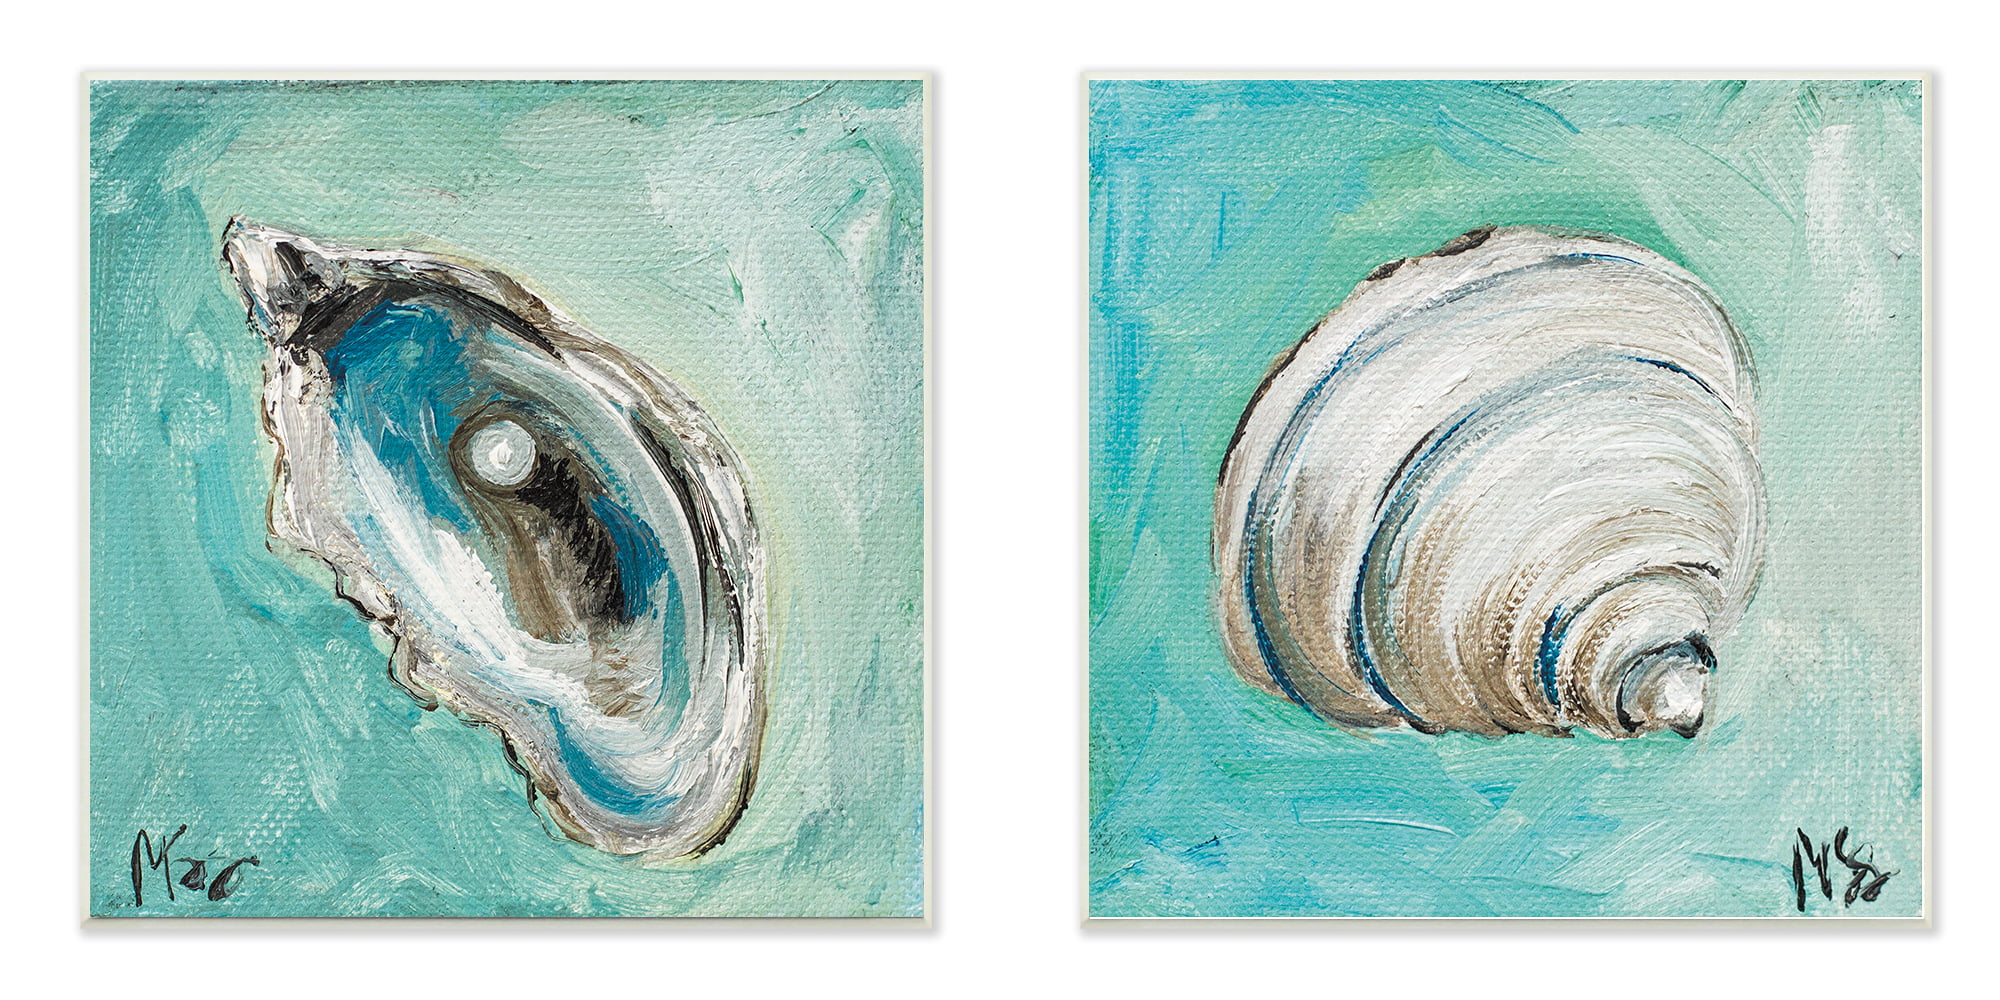 The Stupell Home Decor Collection Mollusk Illustrations 2pc Wall Plaque Art Set, 12 x 0.5 x 12 -New